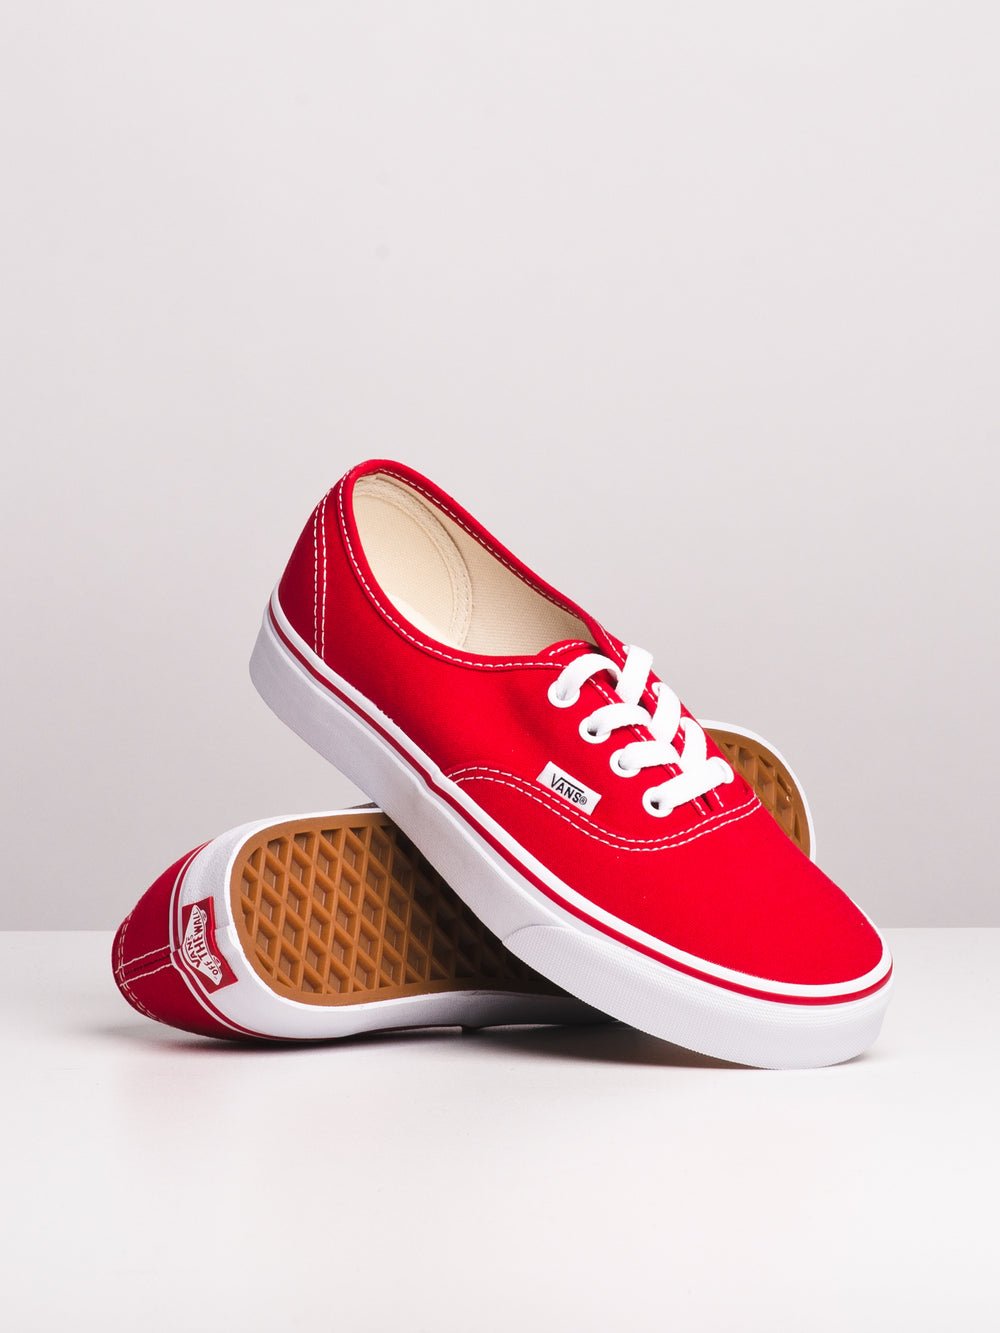 WOMENS VANS AUTHENTIC SNEAKERS - CLEARANCE